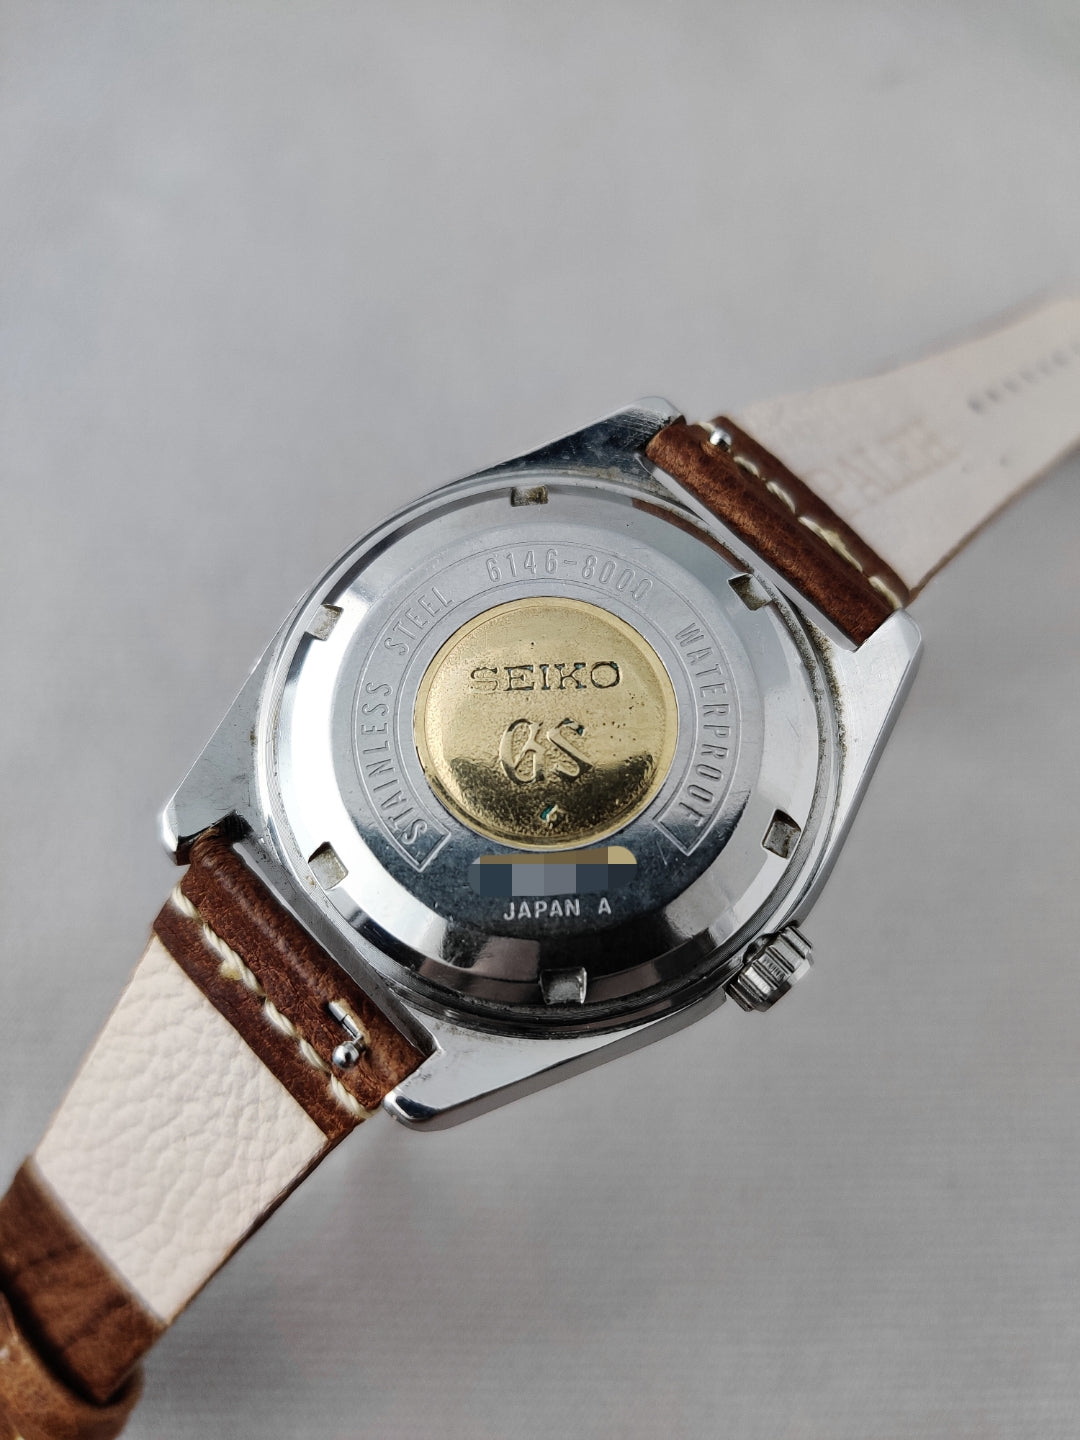 Grand Seiko 6146-8000 from 1969